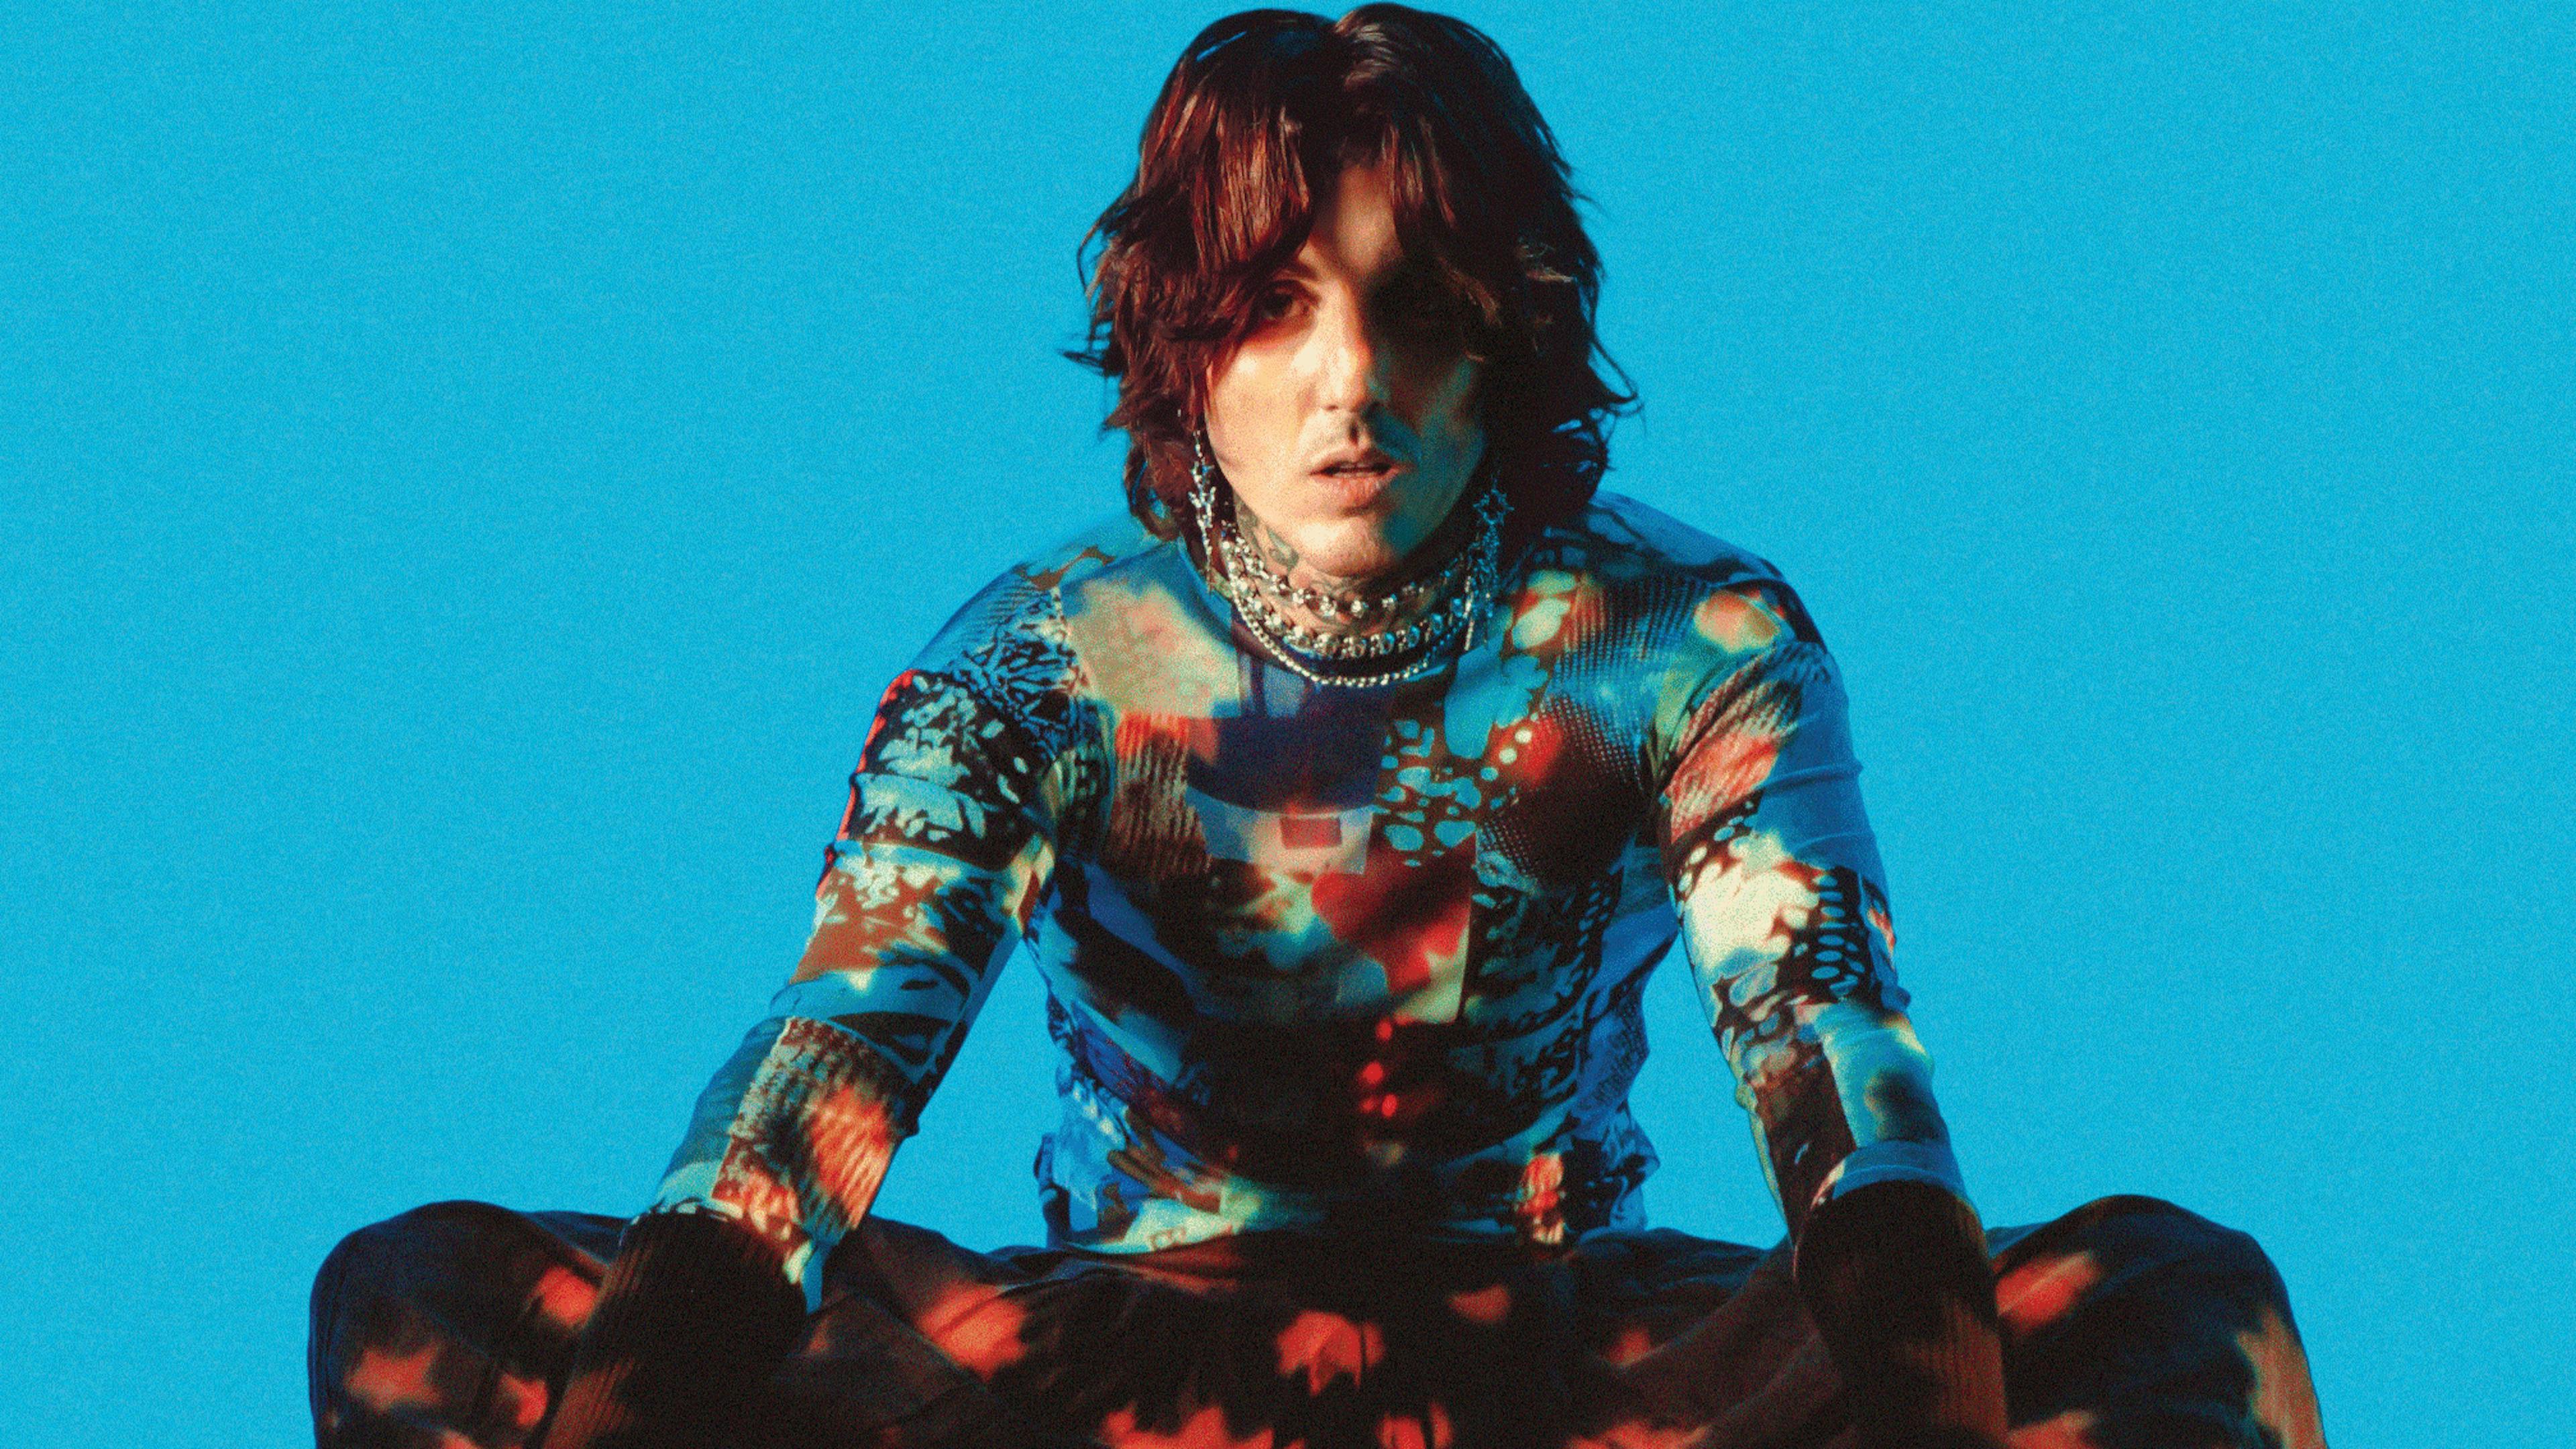 Bring Me The Horizon’s Oli Sykes: “We want to be progressive; we want to be weird; we don’t want to be a regular band”